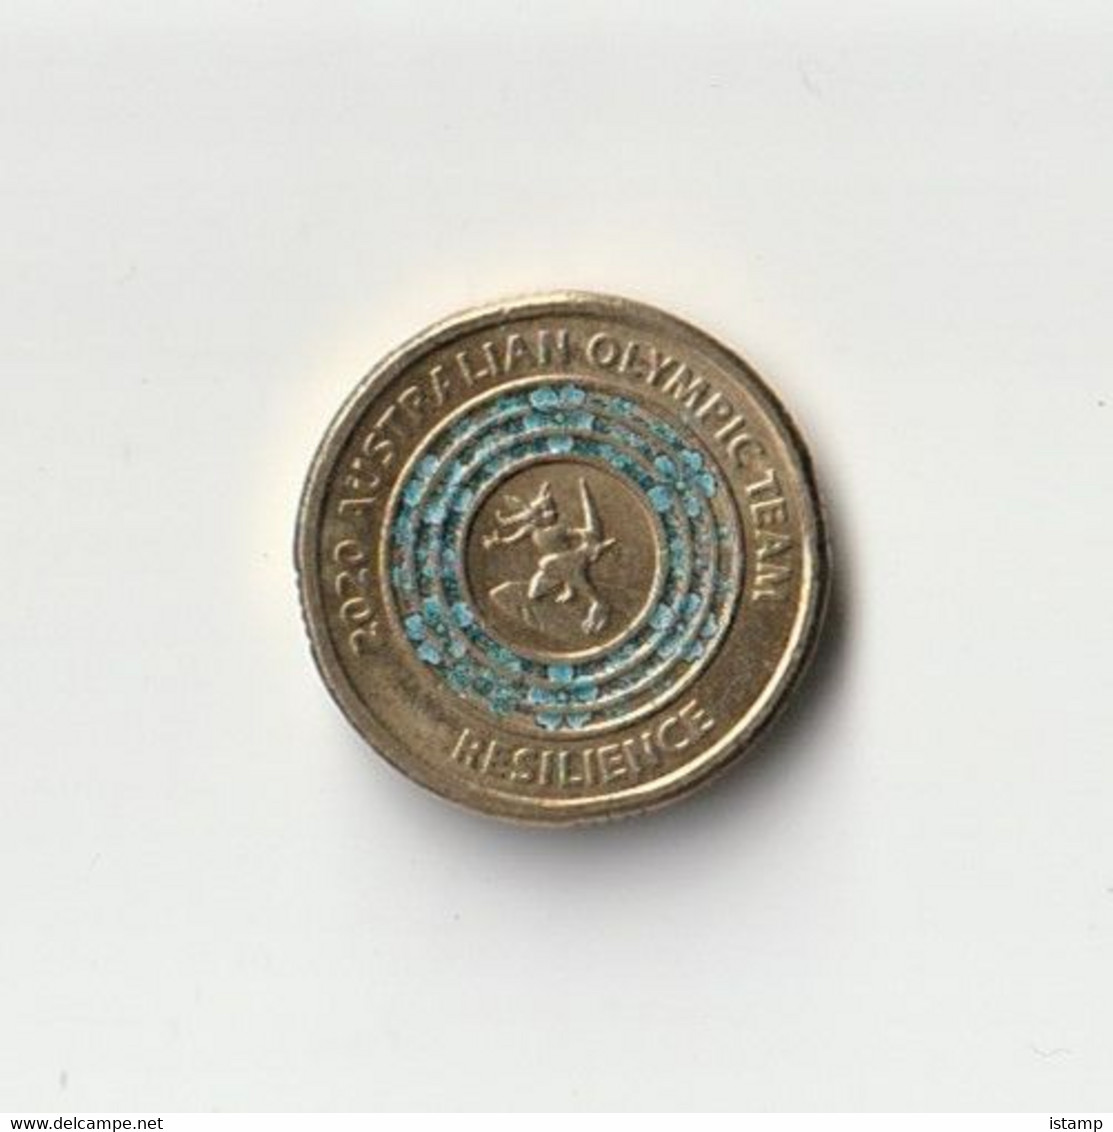 ⭐2020 - Australia Tokyo OLYMPIC GAMES 'Resilience' - $2 Coin Circulated⭐ - 2 Dollars